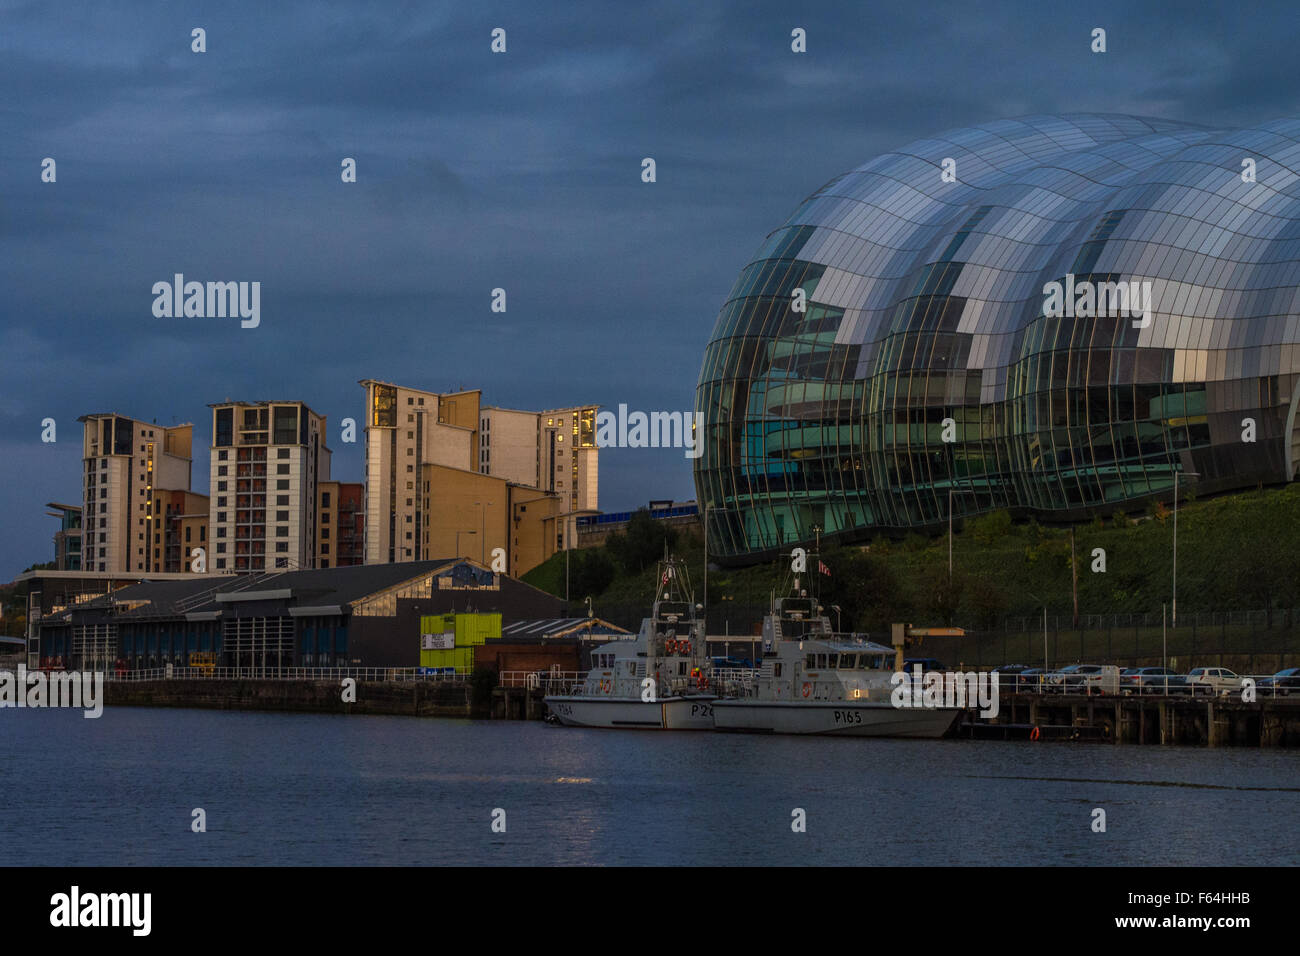 View across the river Tyne with the dome of the Sage Concert Hall on the right, Newcastle Upon Tyne, Tyne and Wear, England. Stock Photo